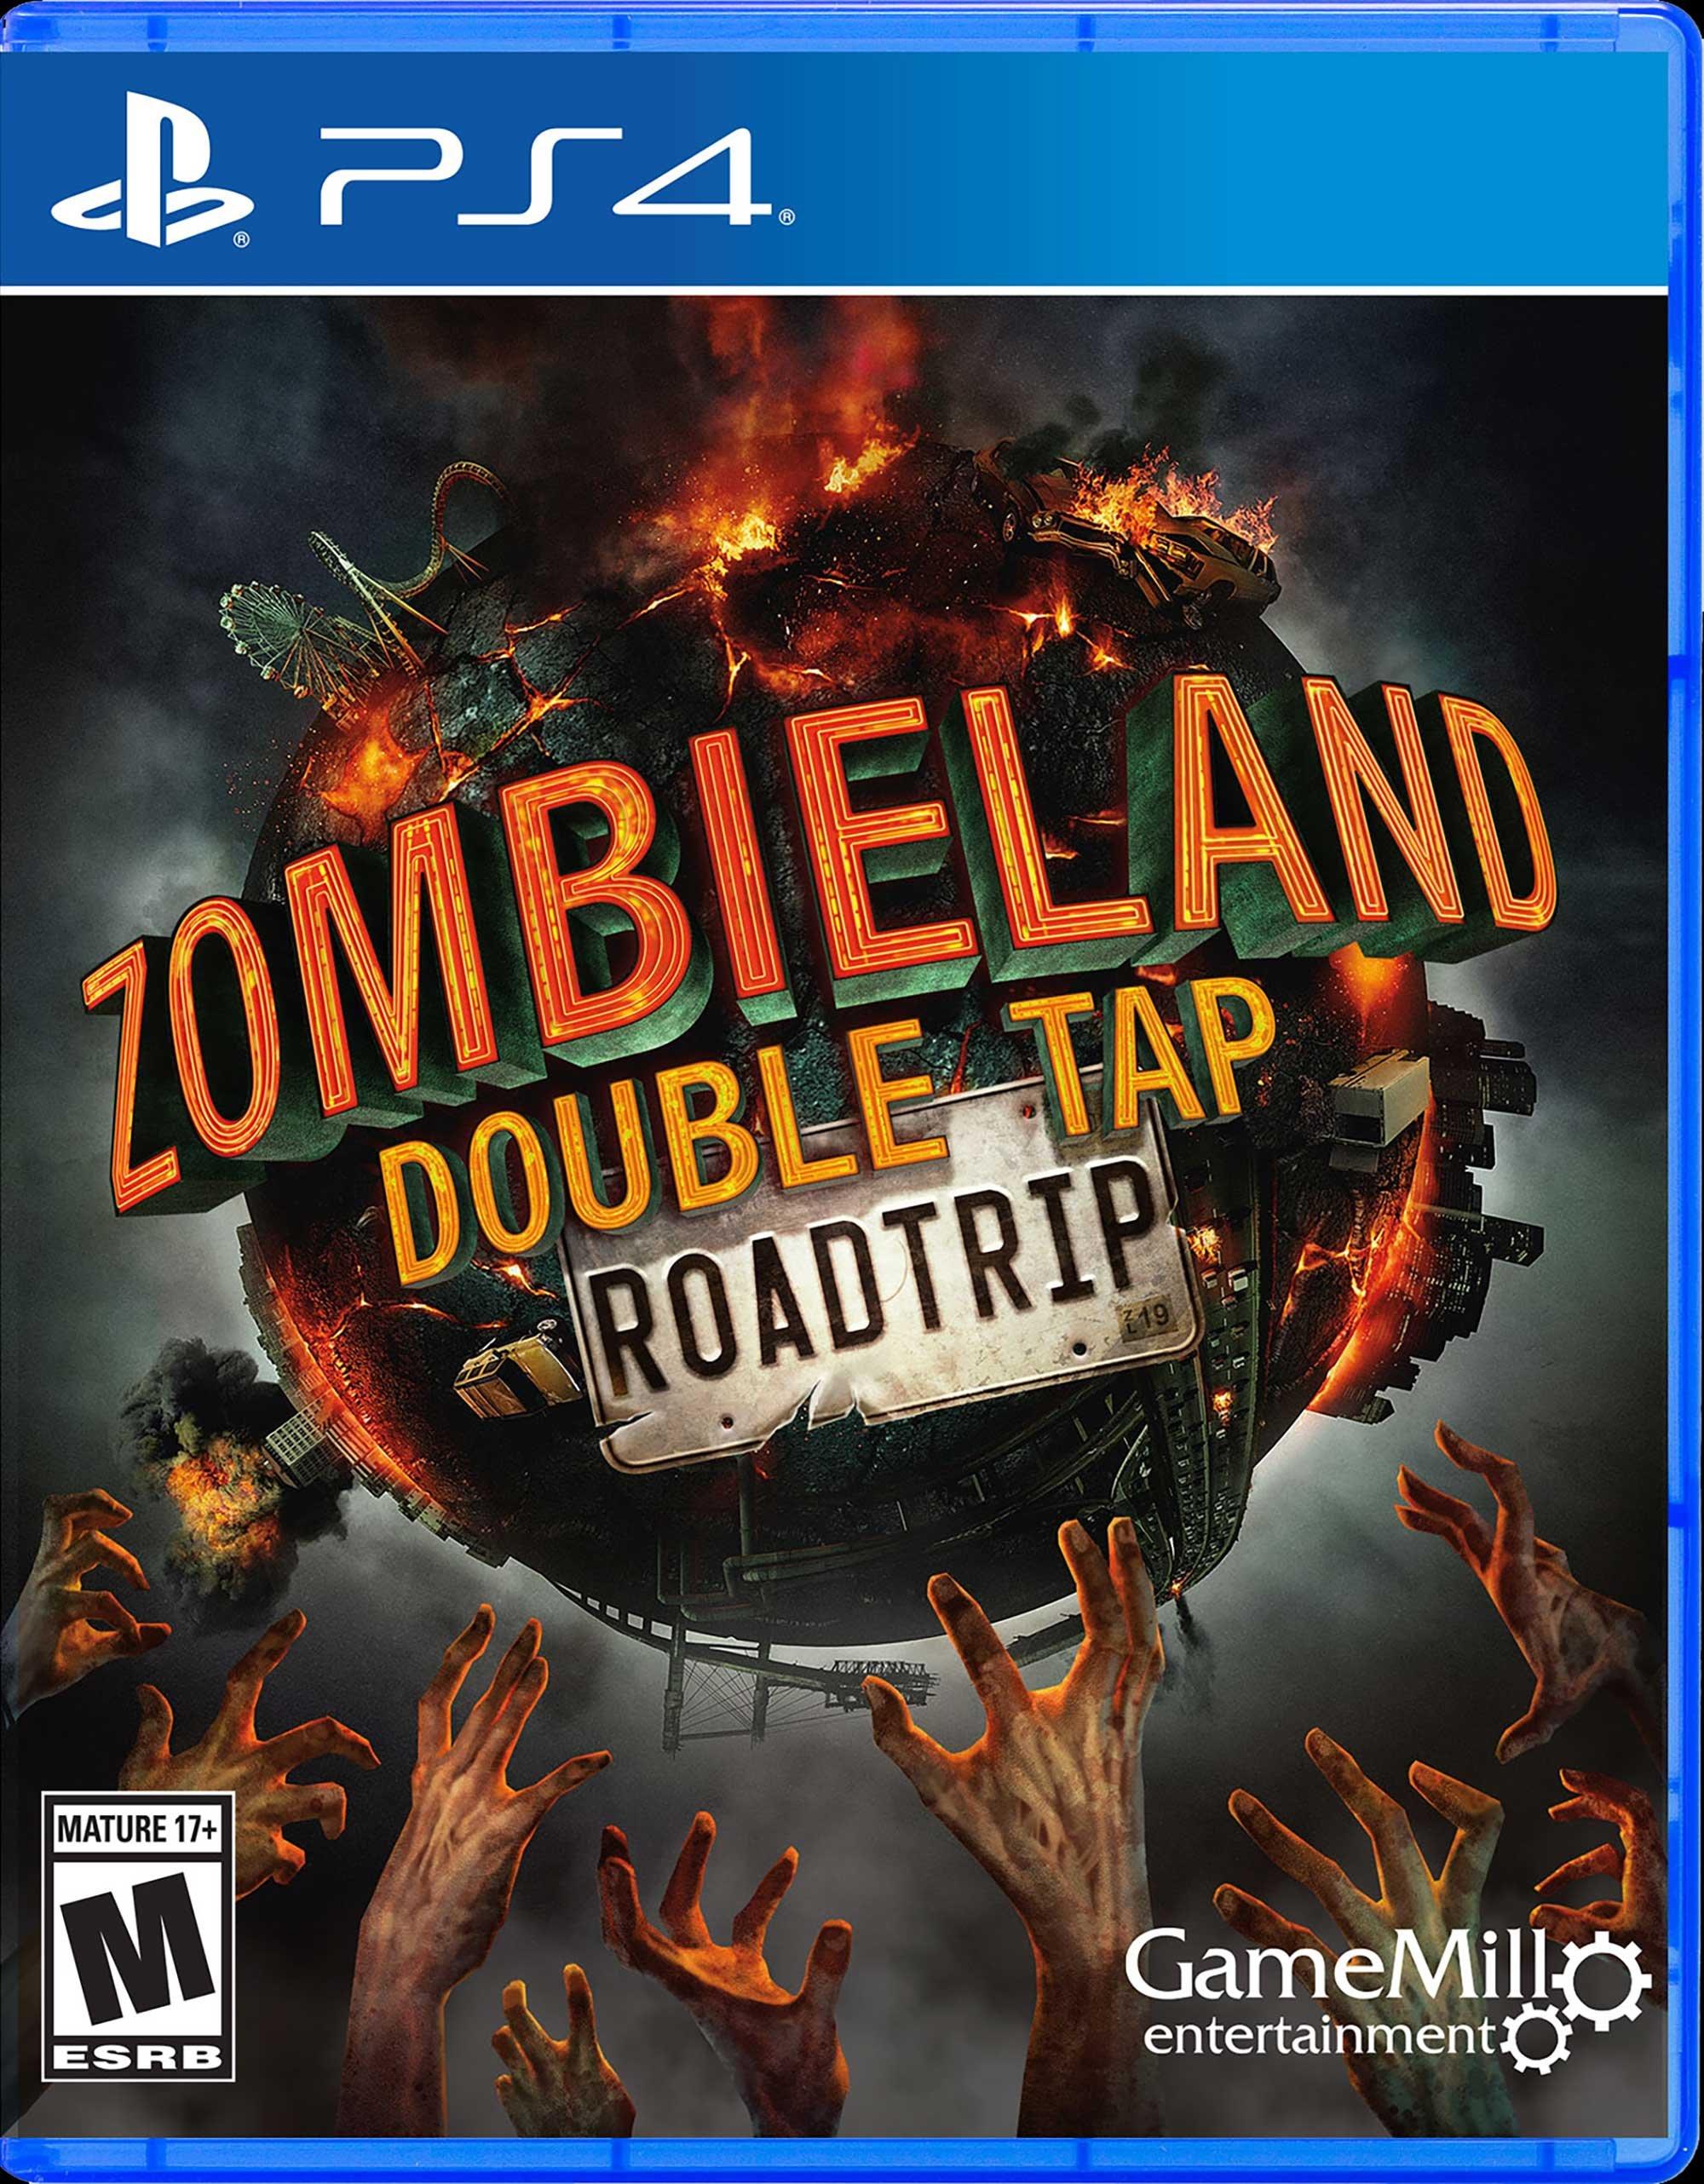 Zombieland: Double Tap Road Trip - PlayStation 4